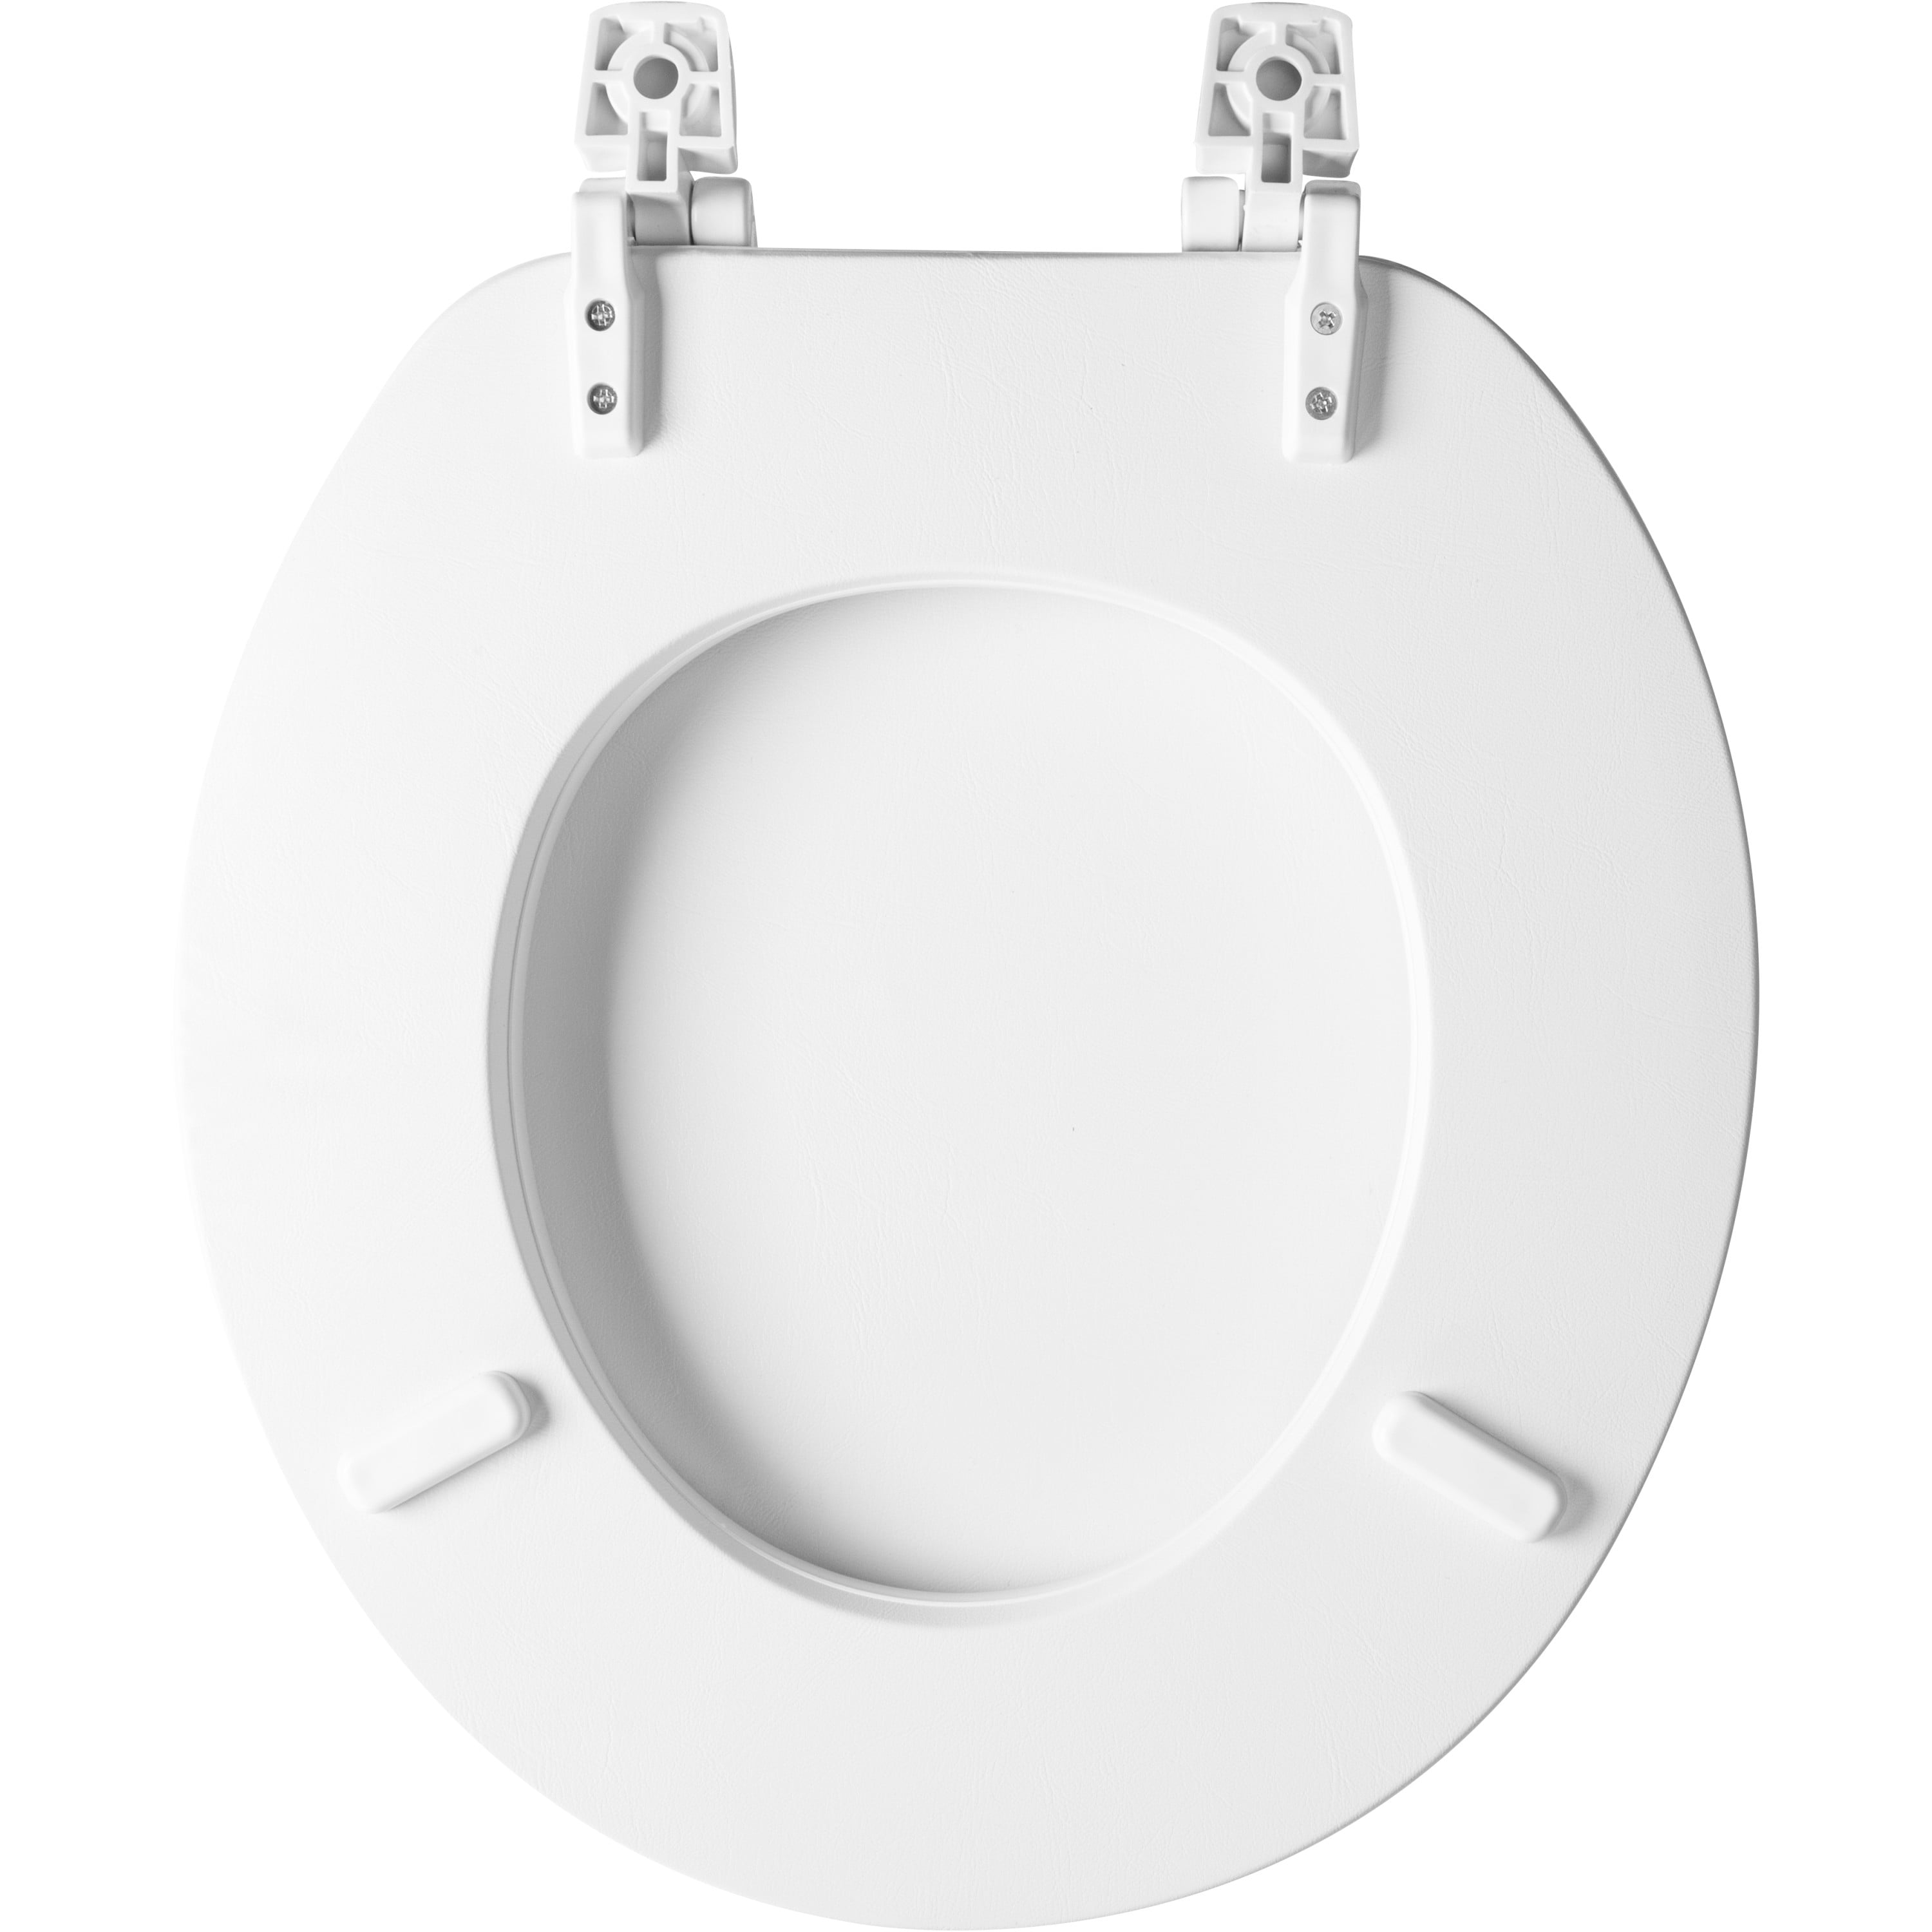 Beldray Beldray Soft Closing Oval Duroplastic Toilet Seat White 